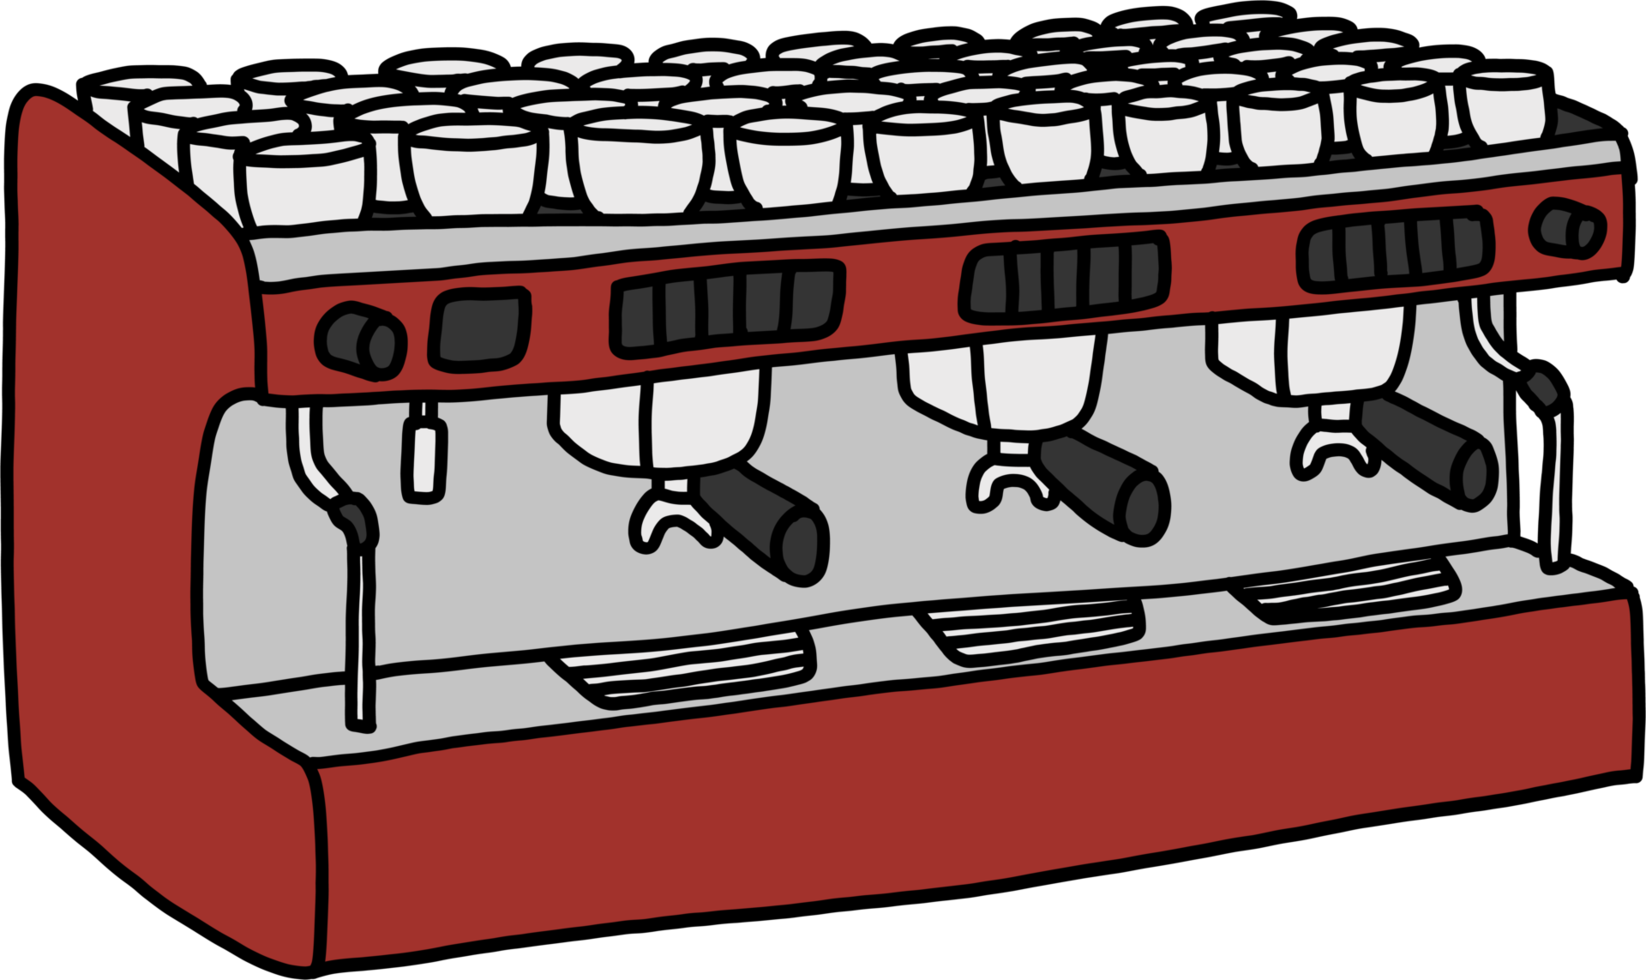 doodle freehand sketch drawing of coffee machine. png